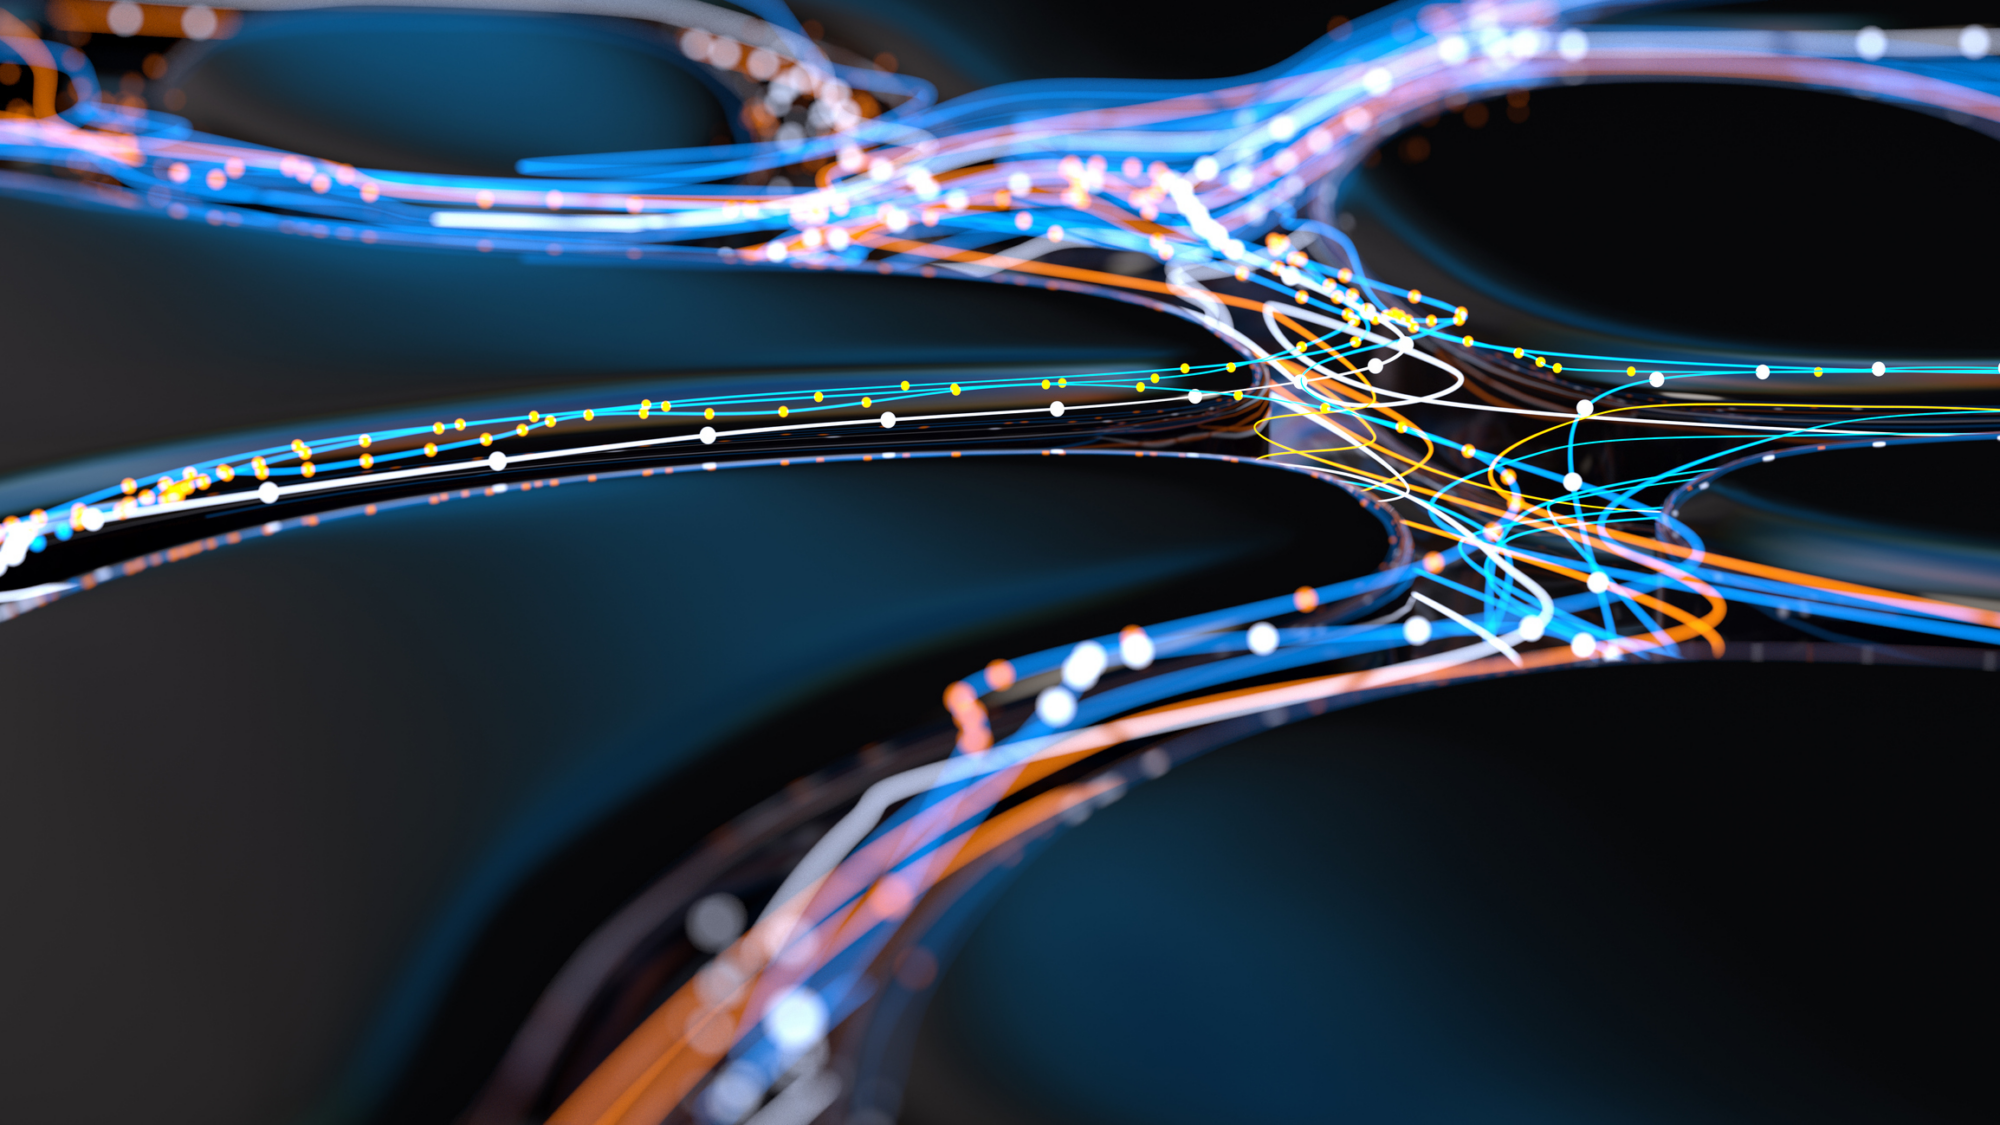 Digital representation of a network of glowing various colored fiber optic cables connecting and interweaving showing interconnections